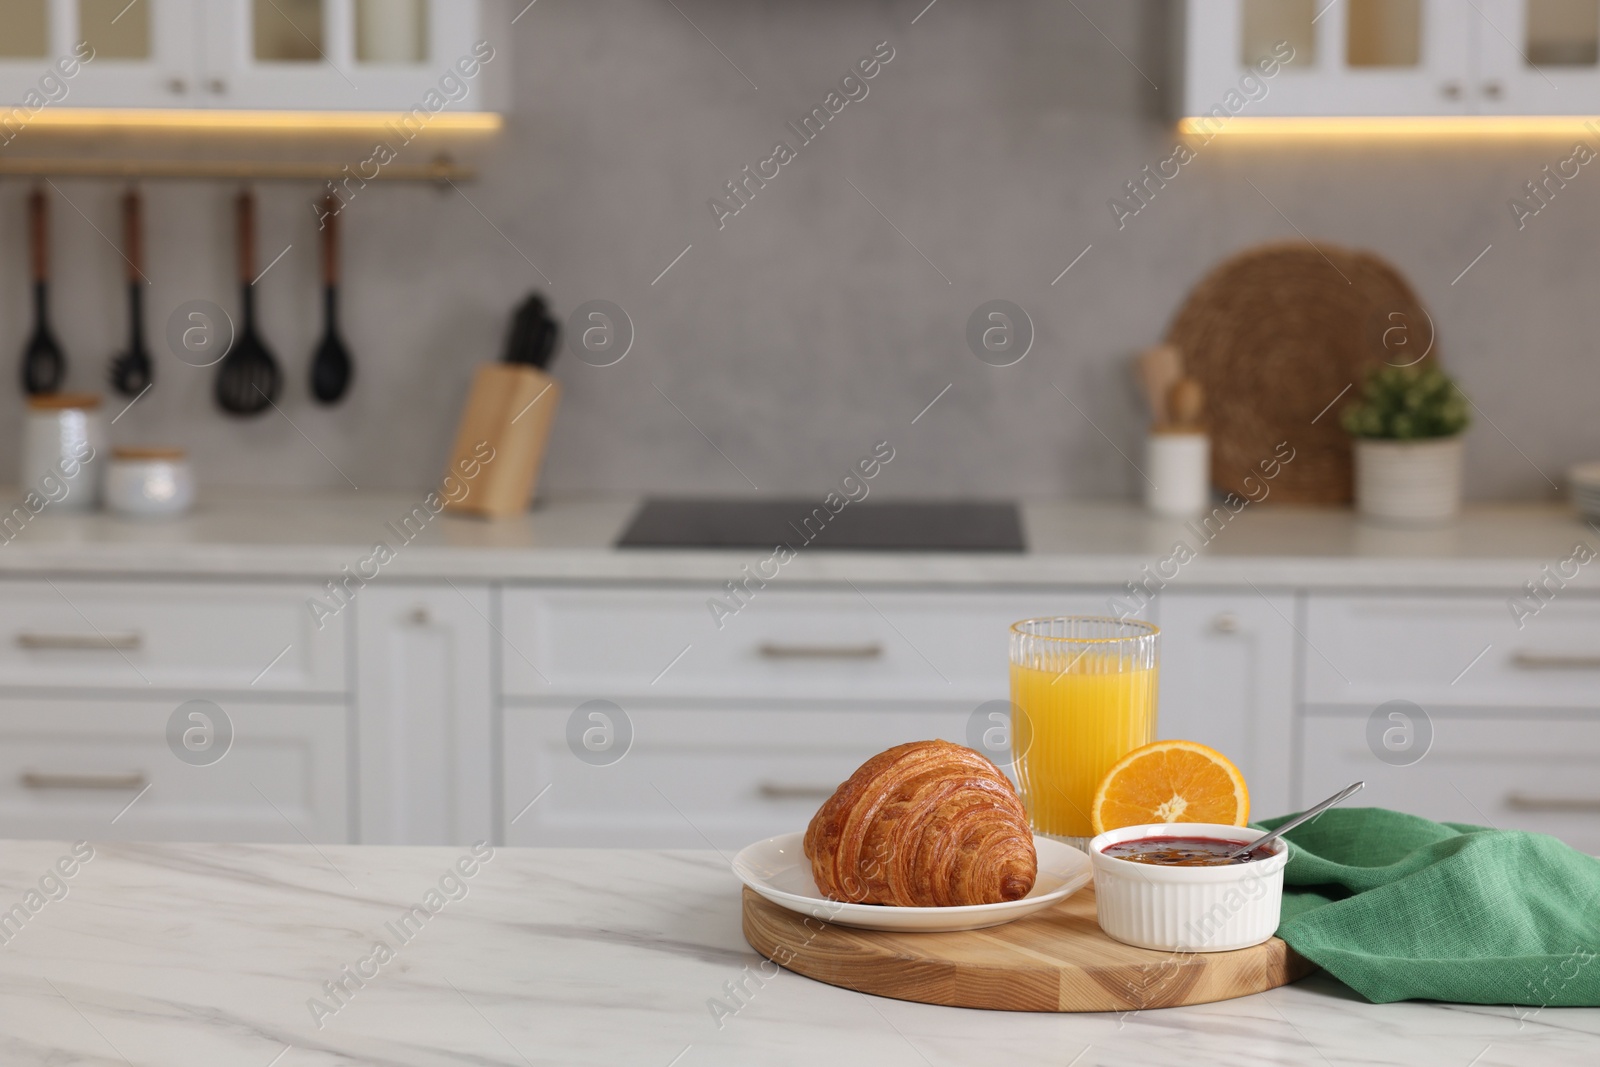 Photo of Breakfast served in kitchen. Fresh croissant, jam and orange juice on white table. Space for text